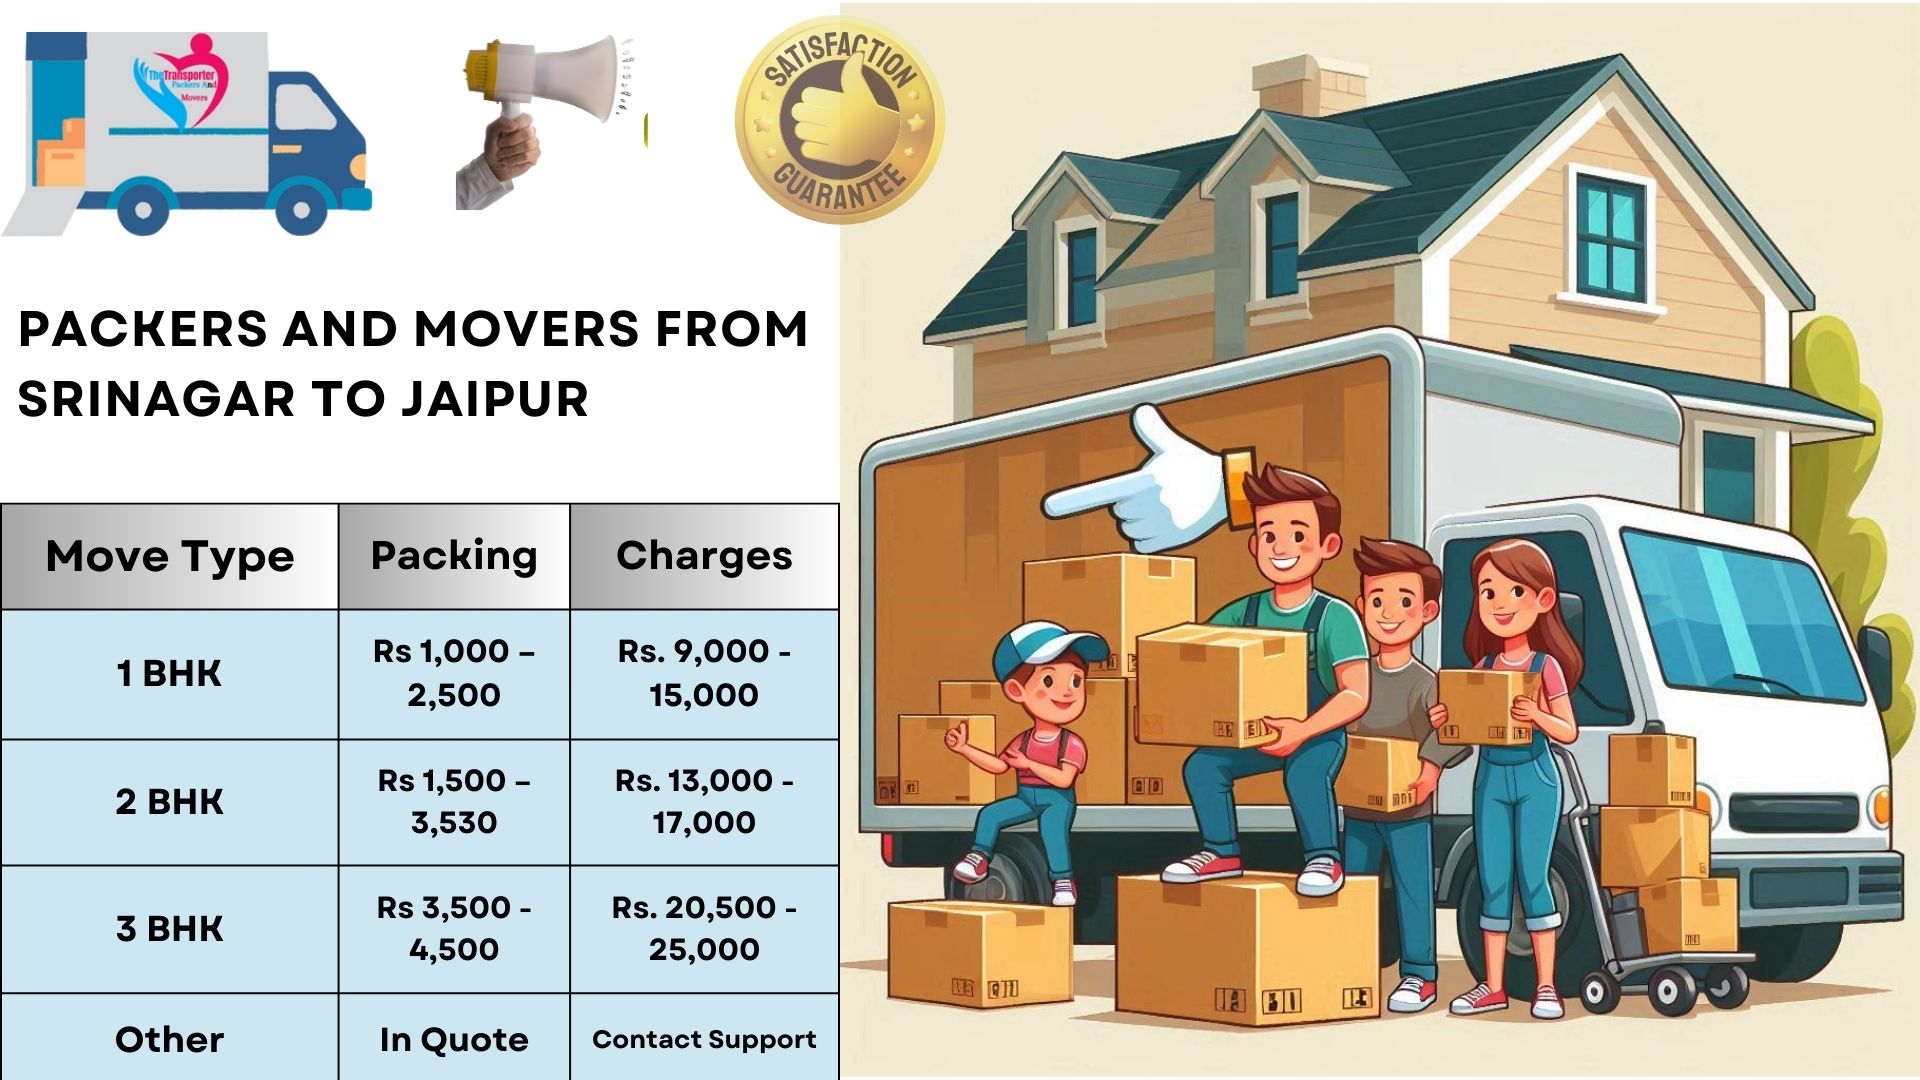 Your household goods shifting from Srinagar to Jaipur